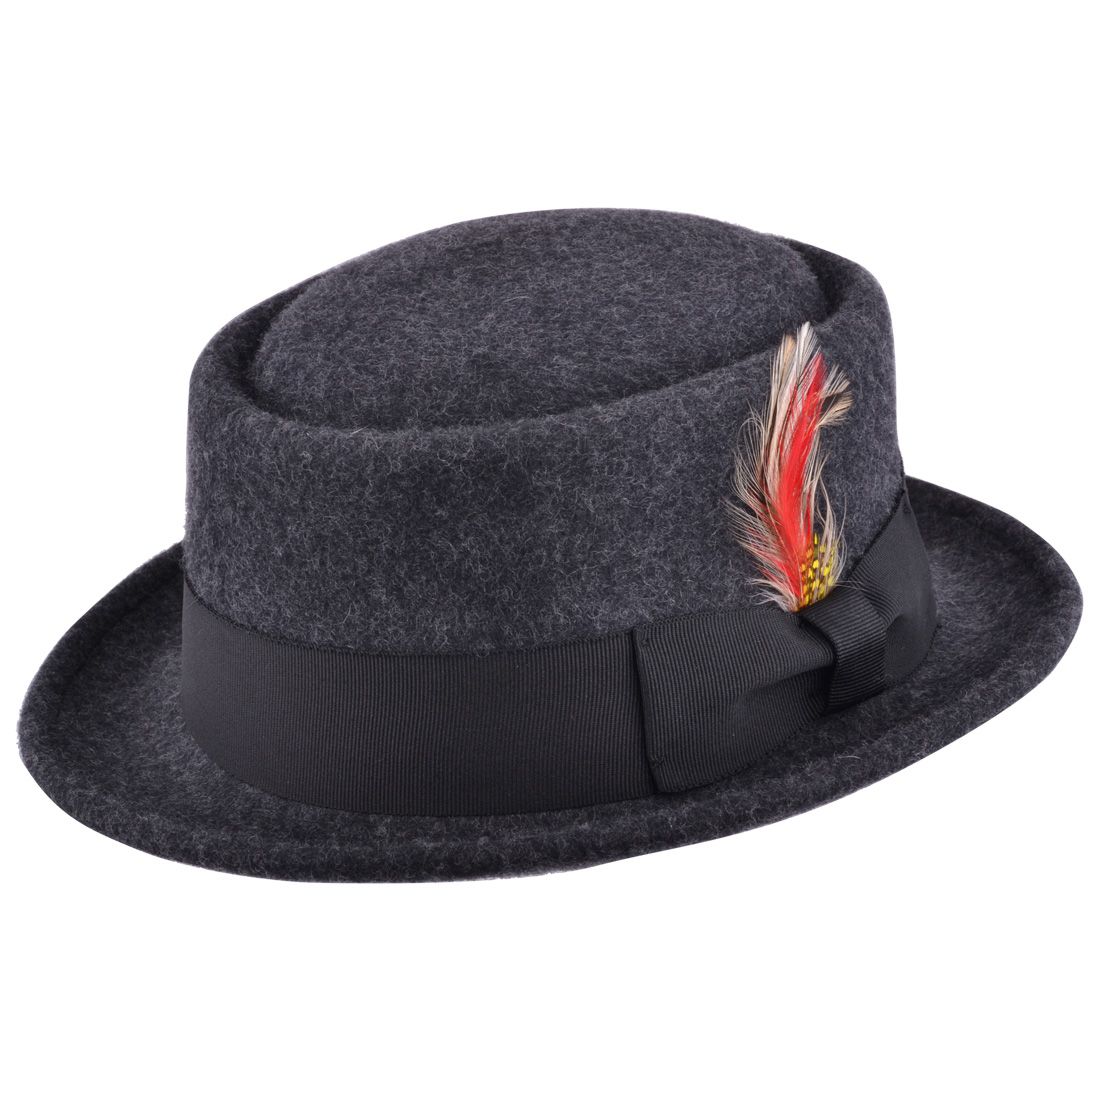 Wool Crushable Pork Pie Hat - Charcoal